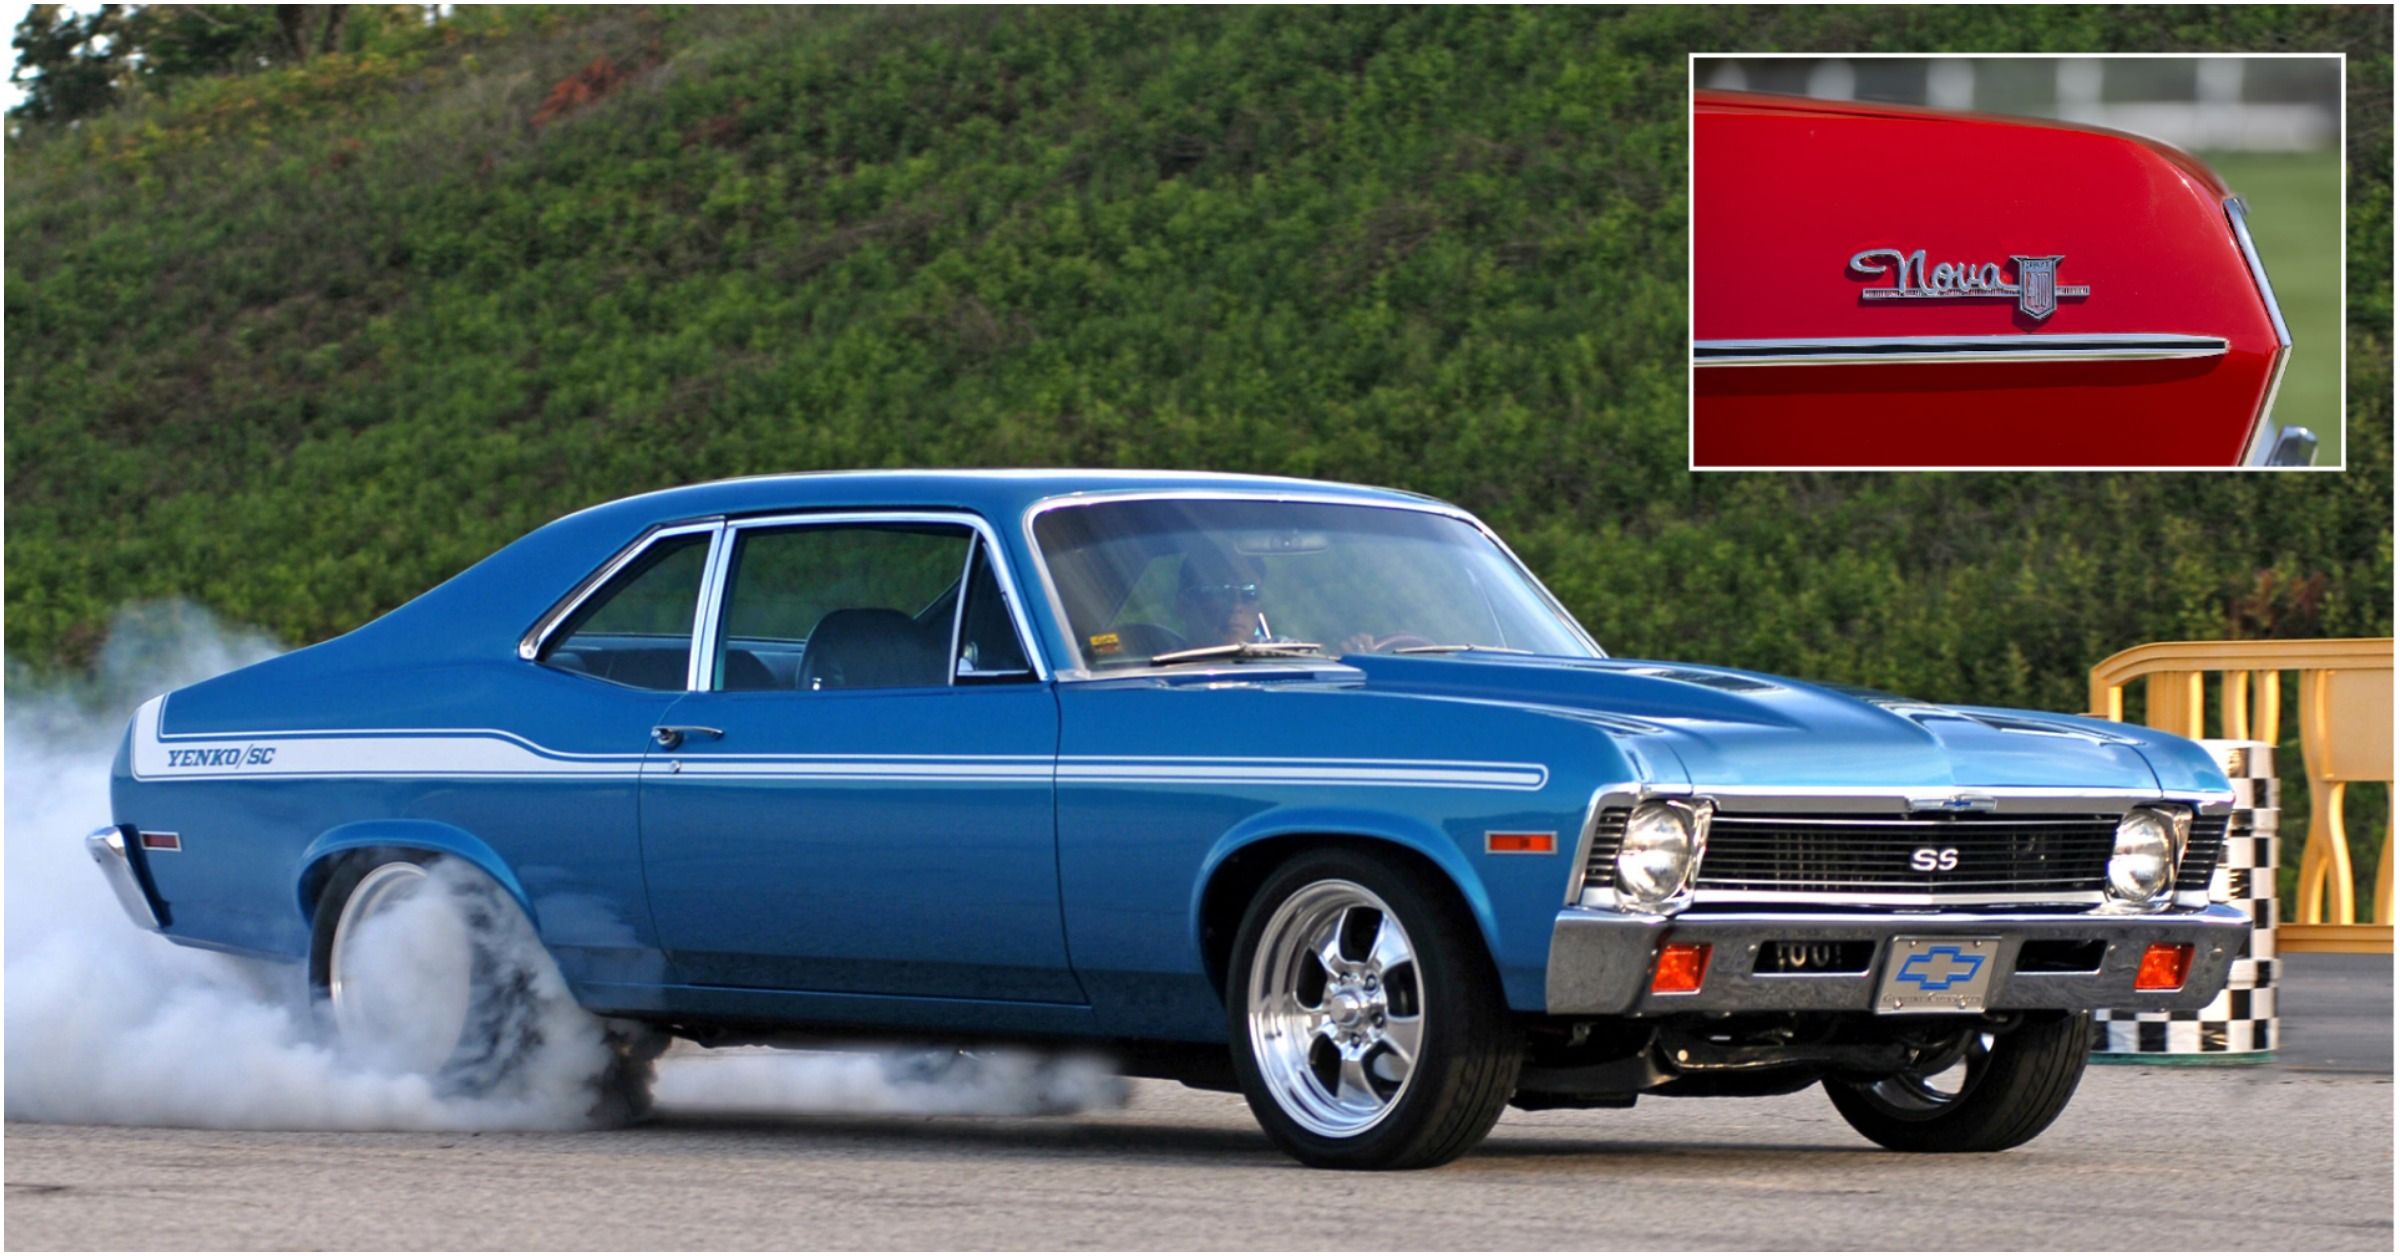 15-surprising-facts-about-the-chevy-nova